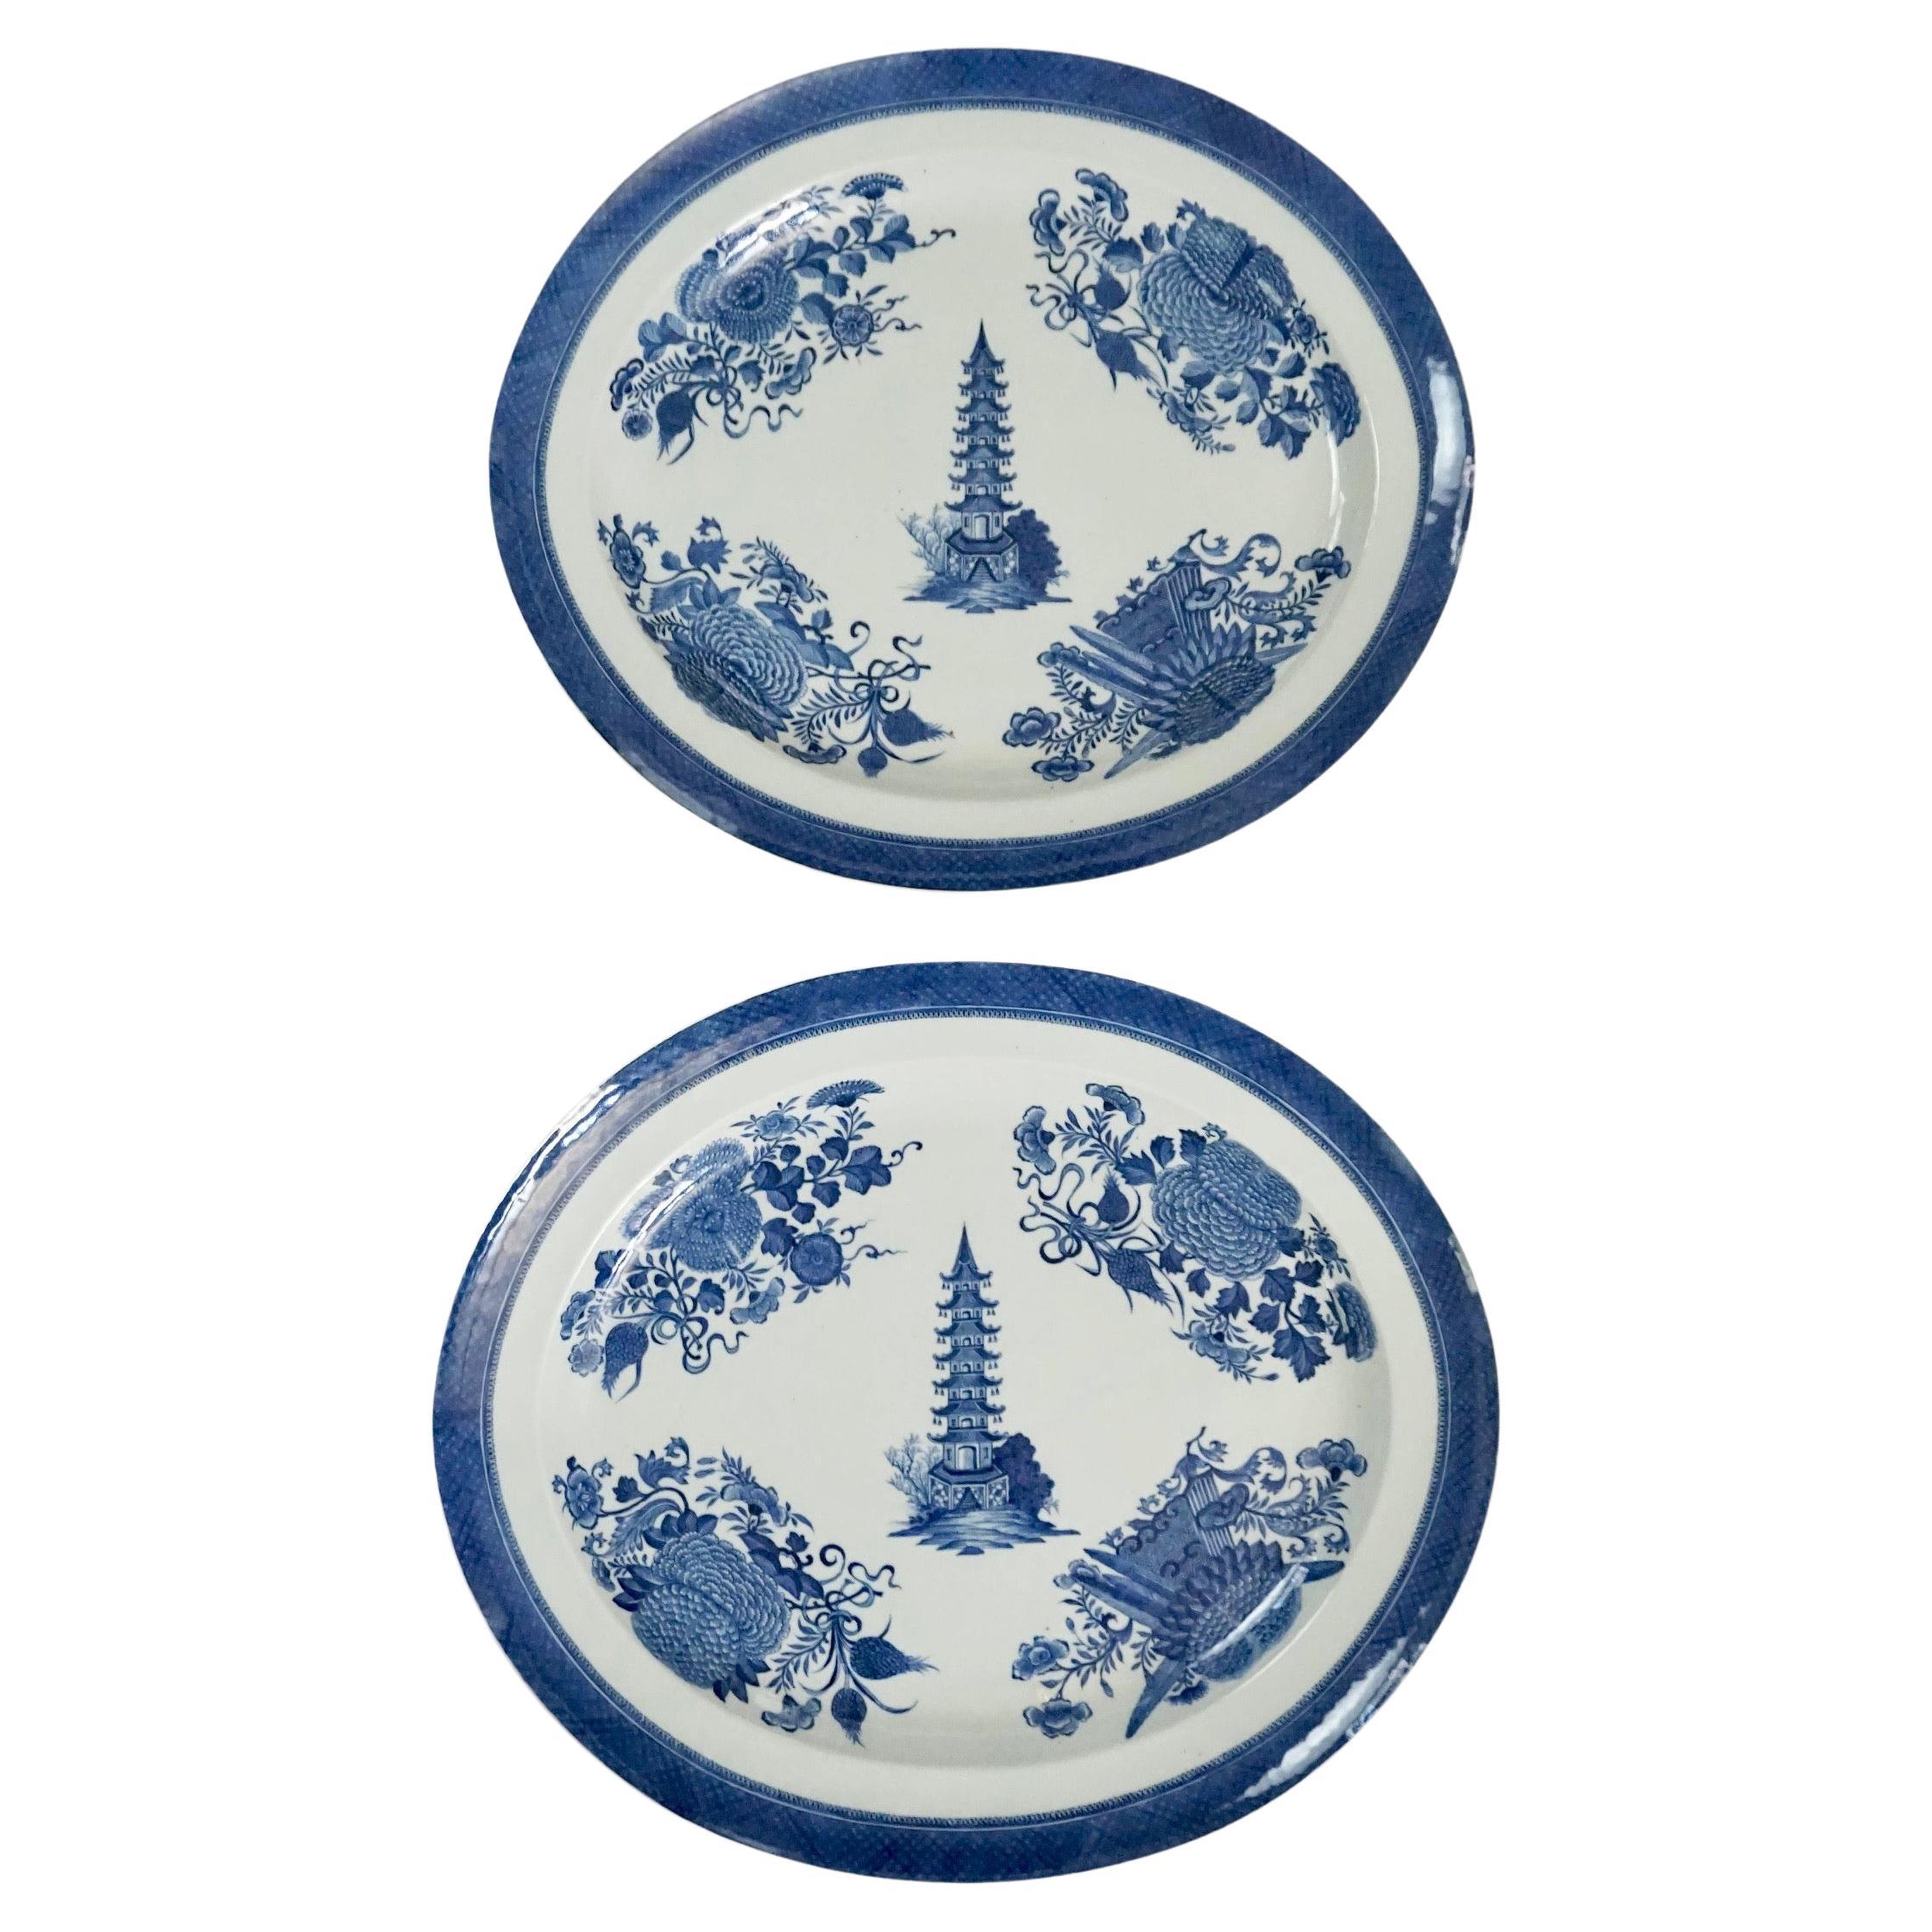 Chinese Export 'Blue Fitzhugh' Platters from the Cabot-Perkins Service, c. 1812